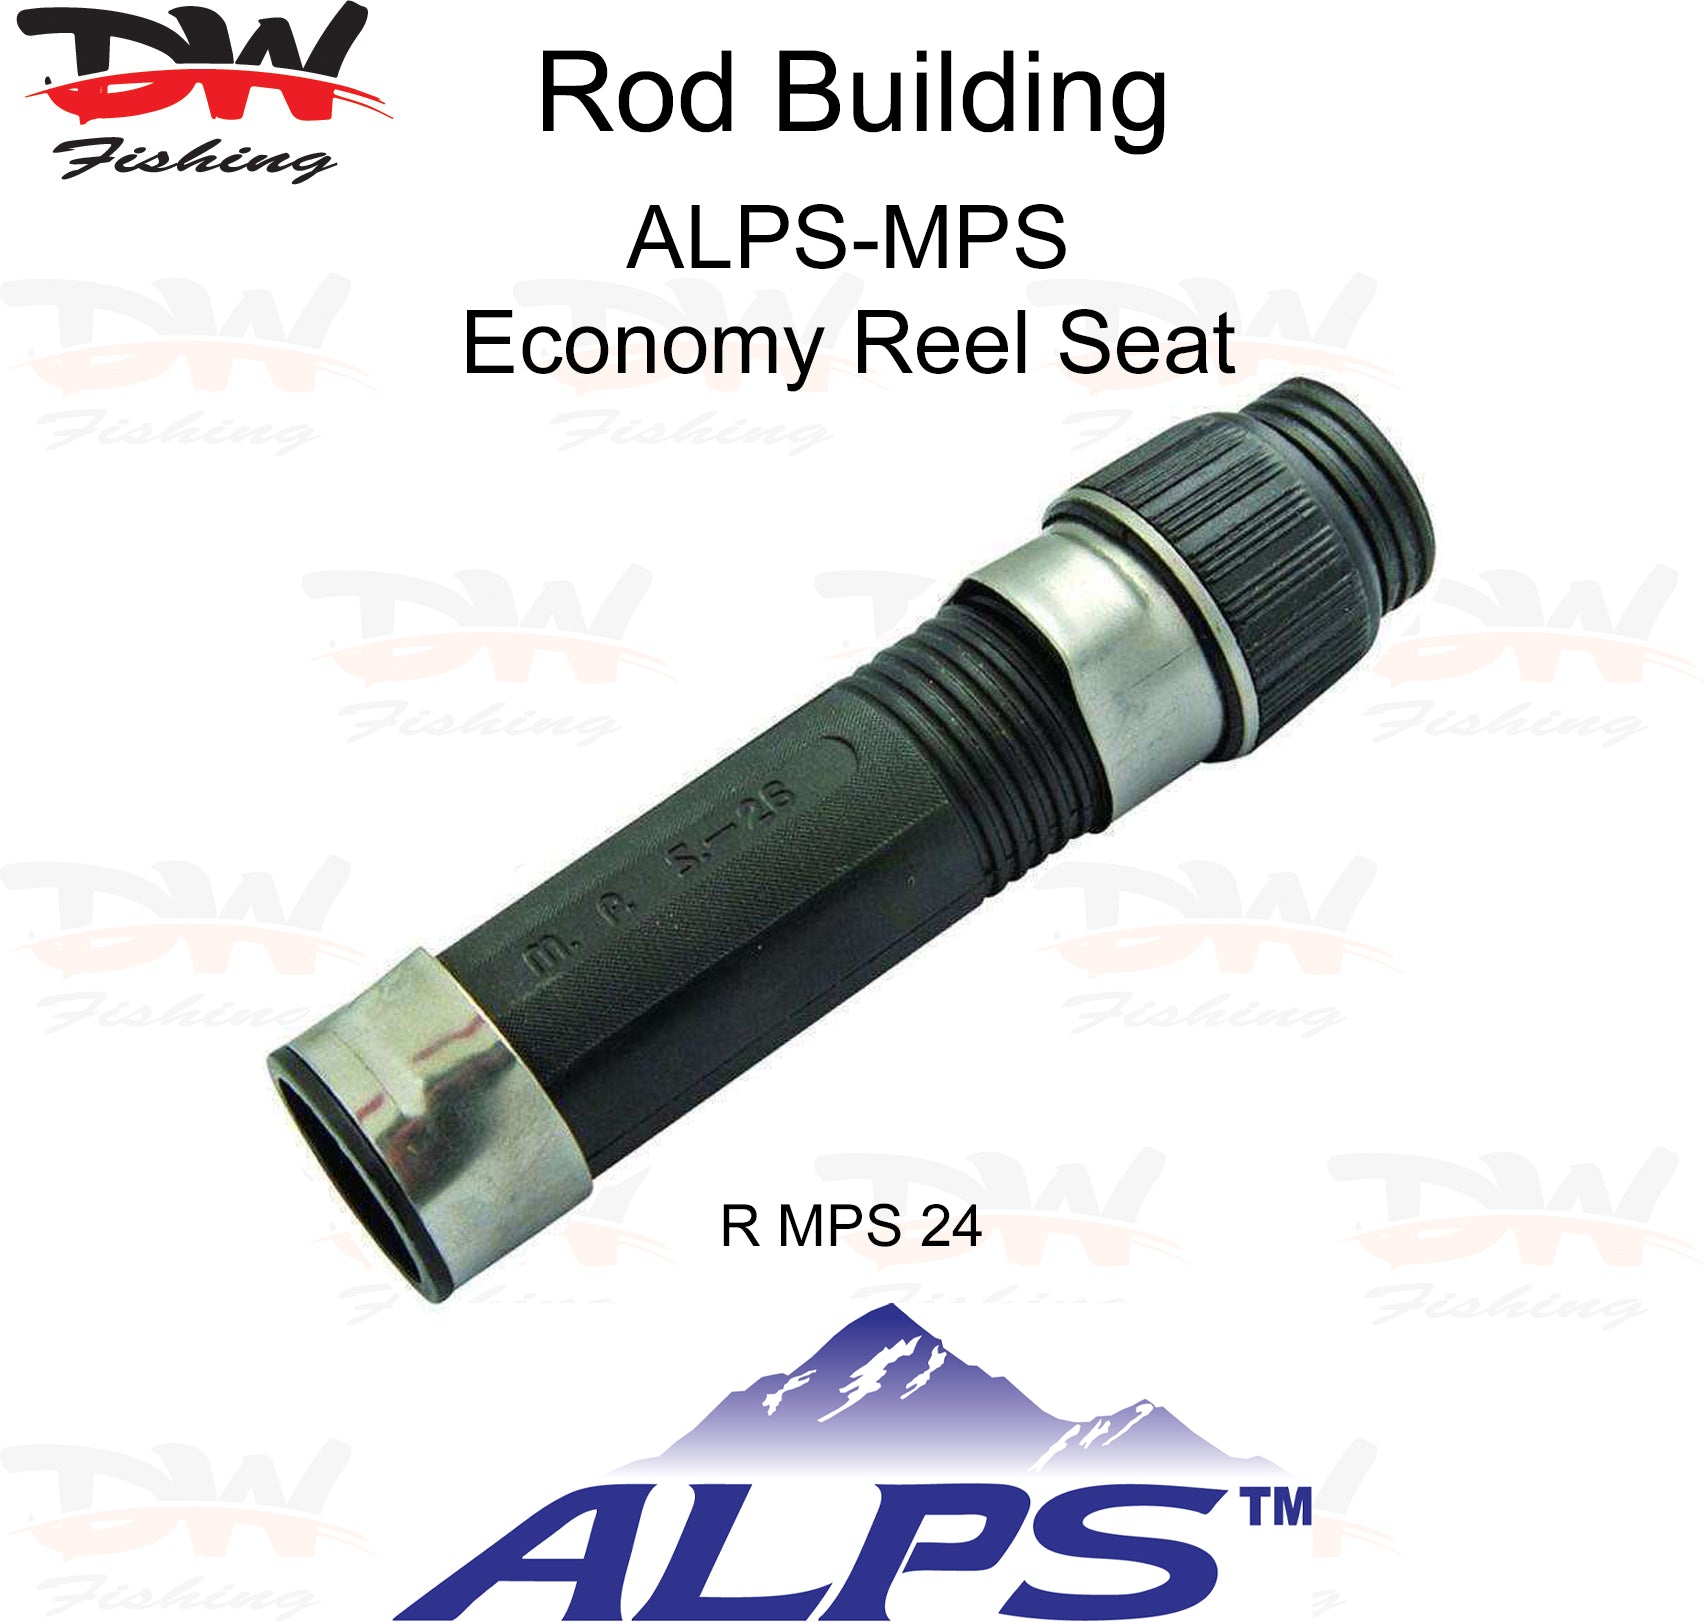 ALPS MPS economy reel seat size 24 with ALPS logo below